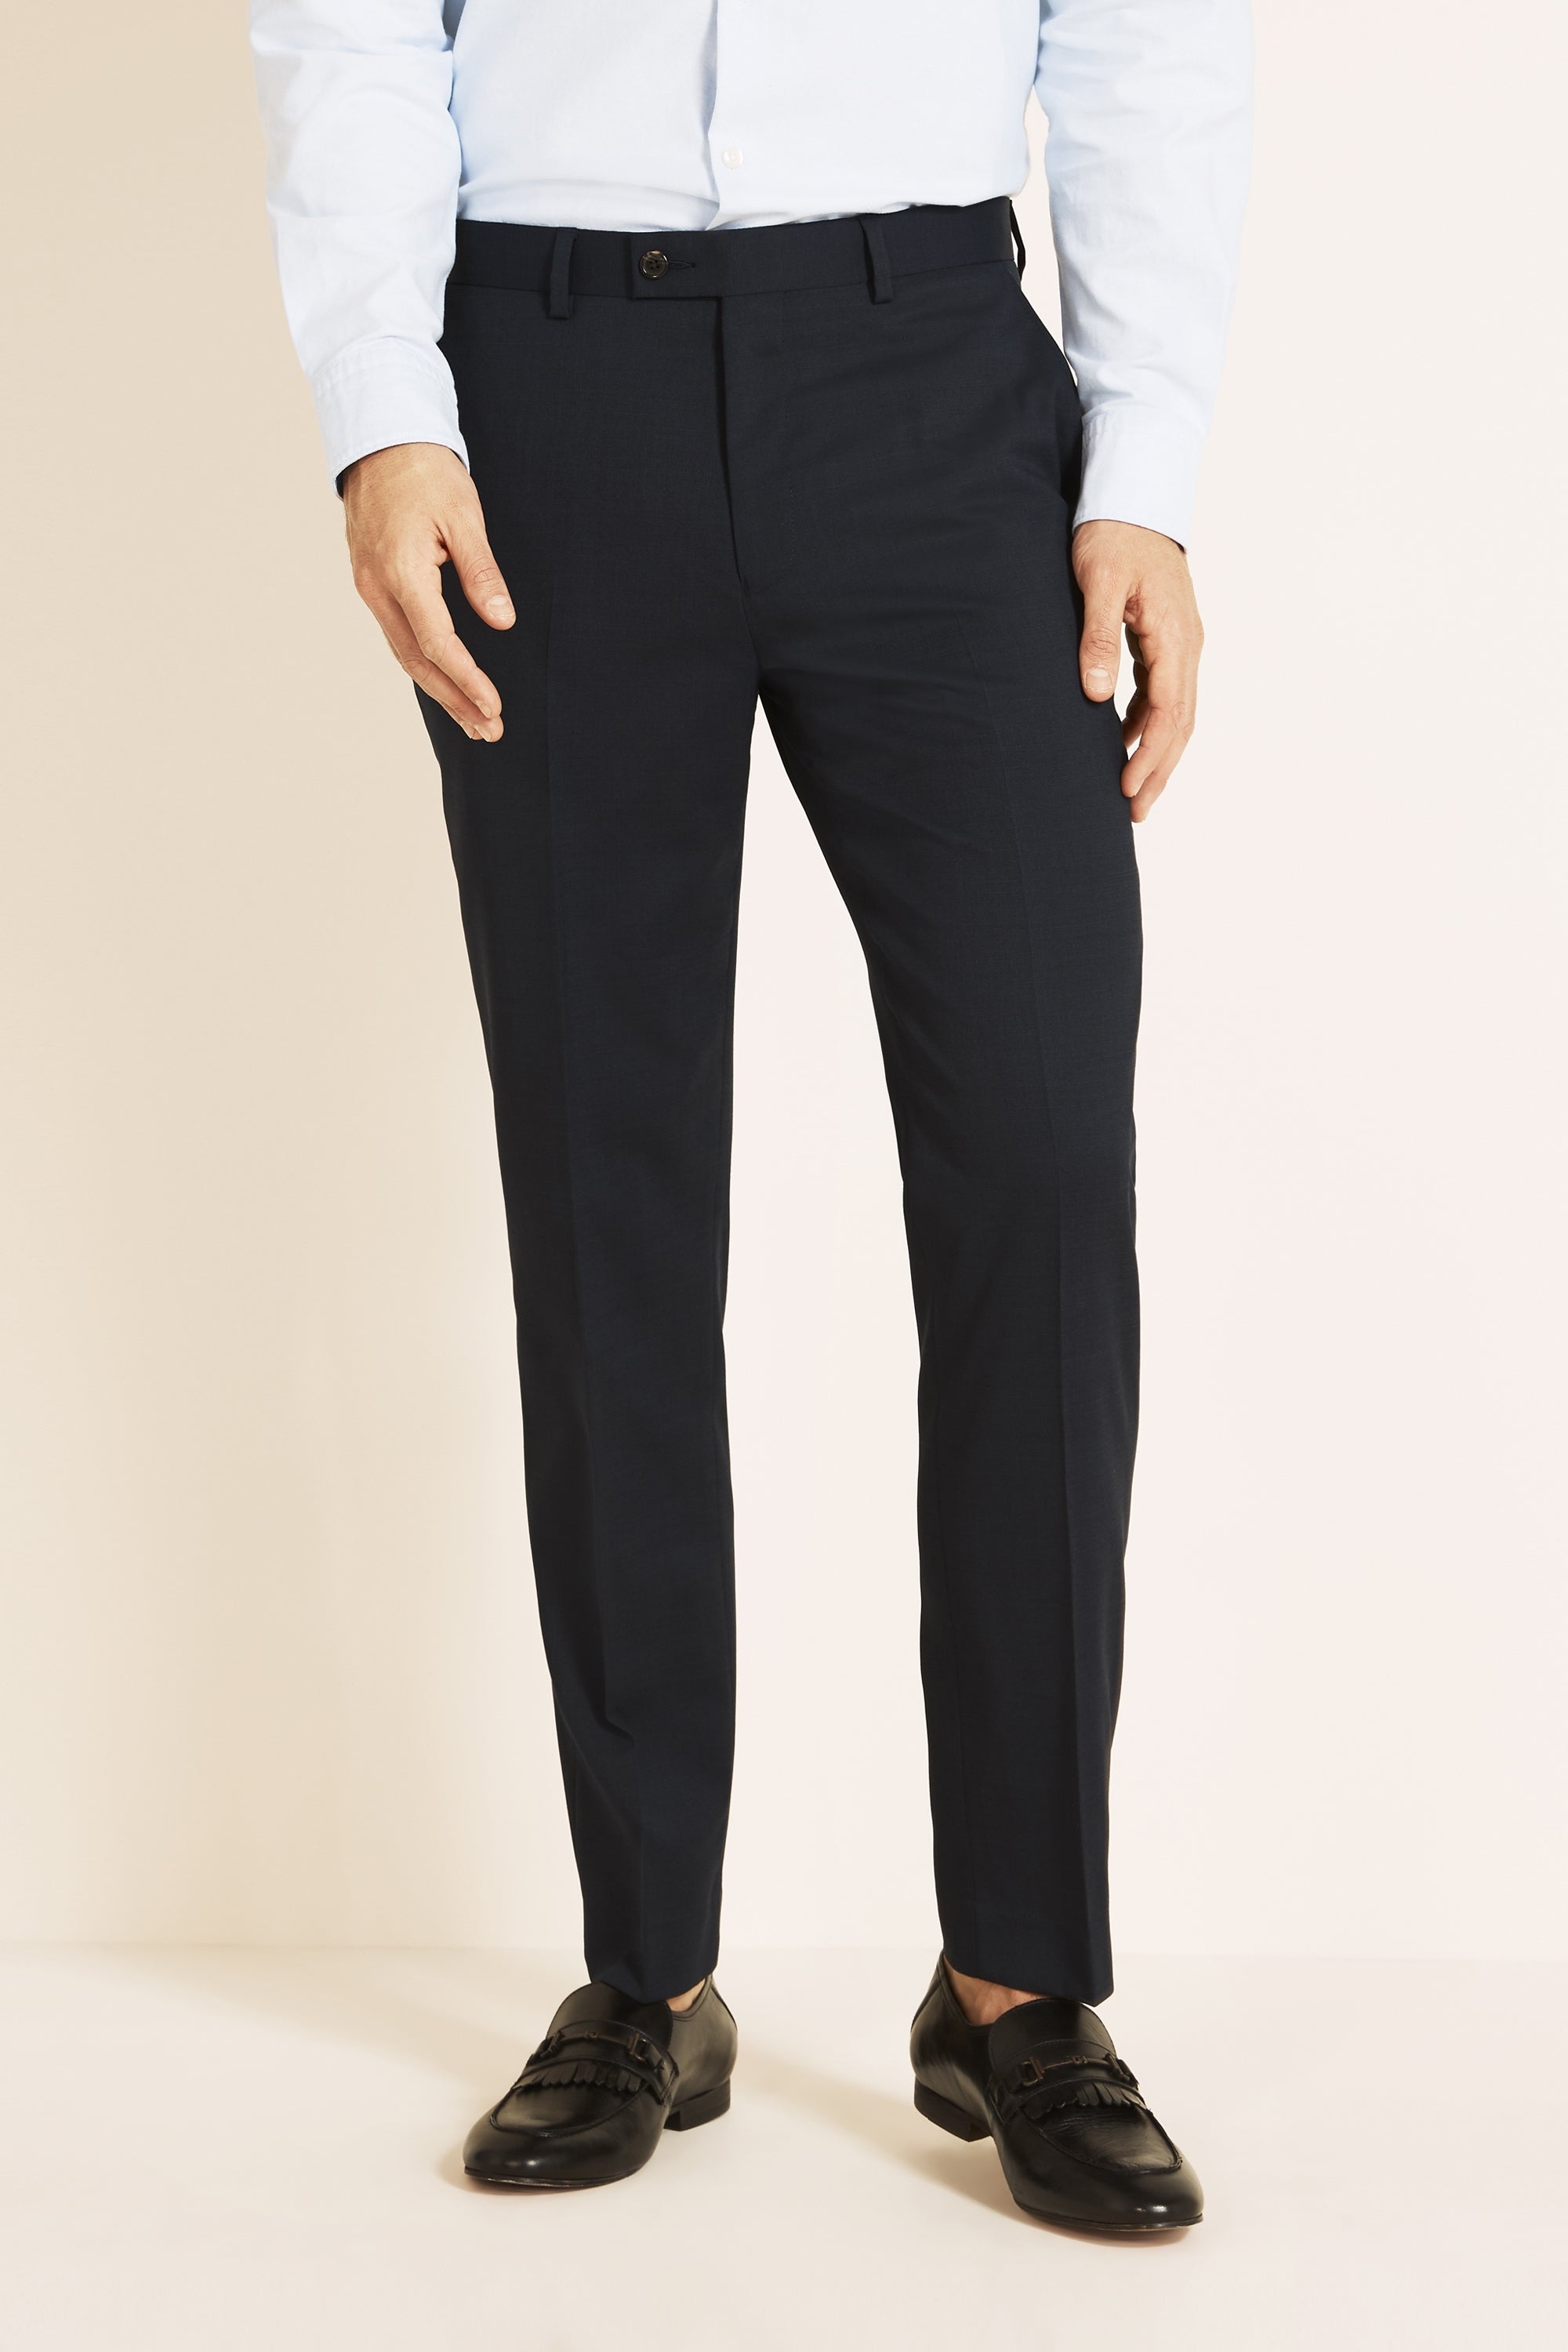 TED BAKER | Alter Eco Tailored Fit Navy Pindot Trousers | Moss Box